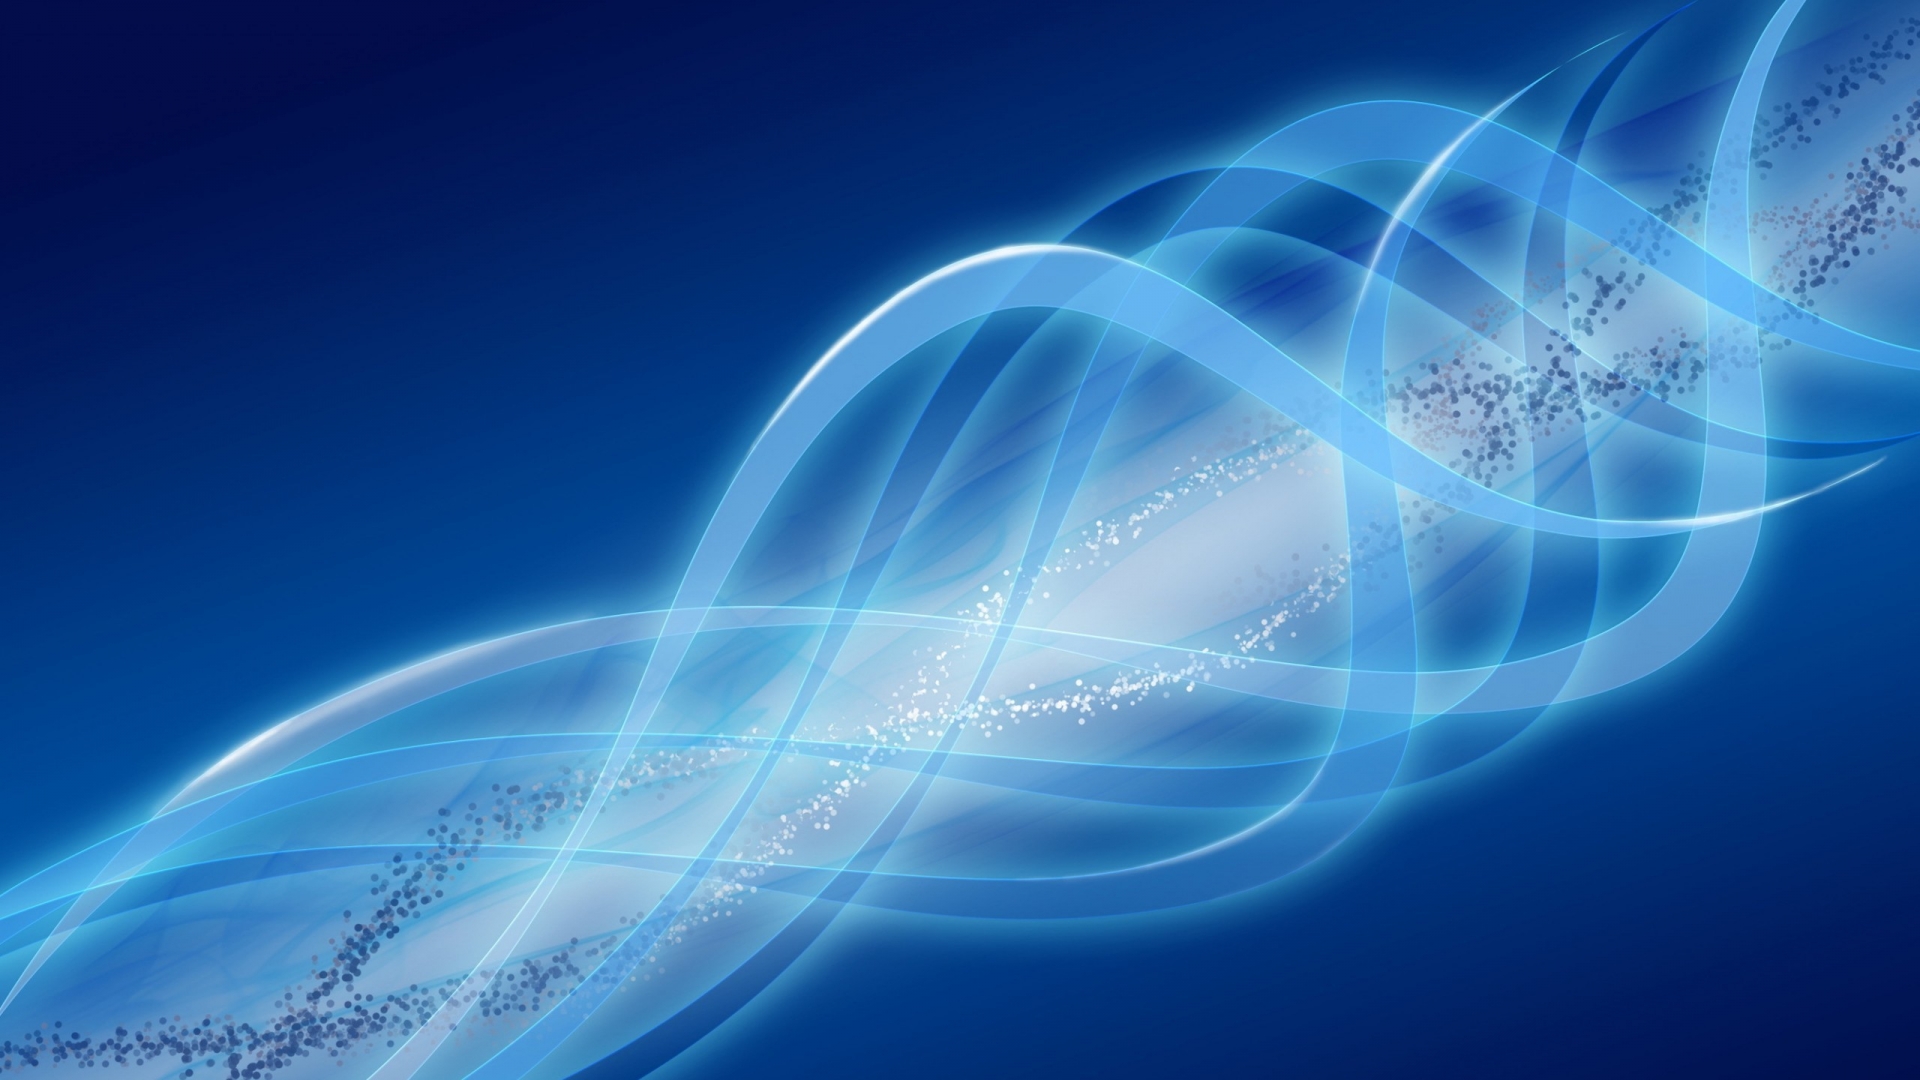 Blue Abstract Curves for 1920 x 1080 HDTV 1080p resolution